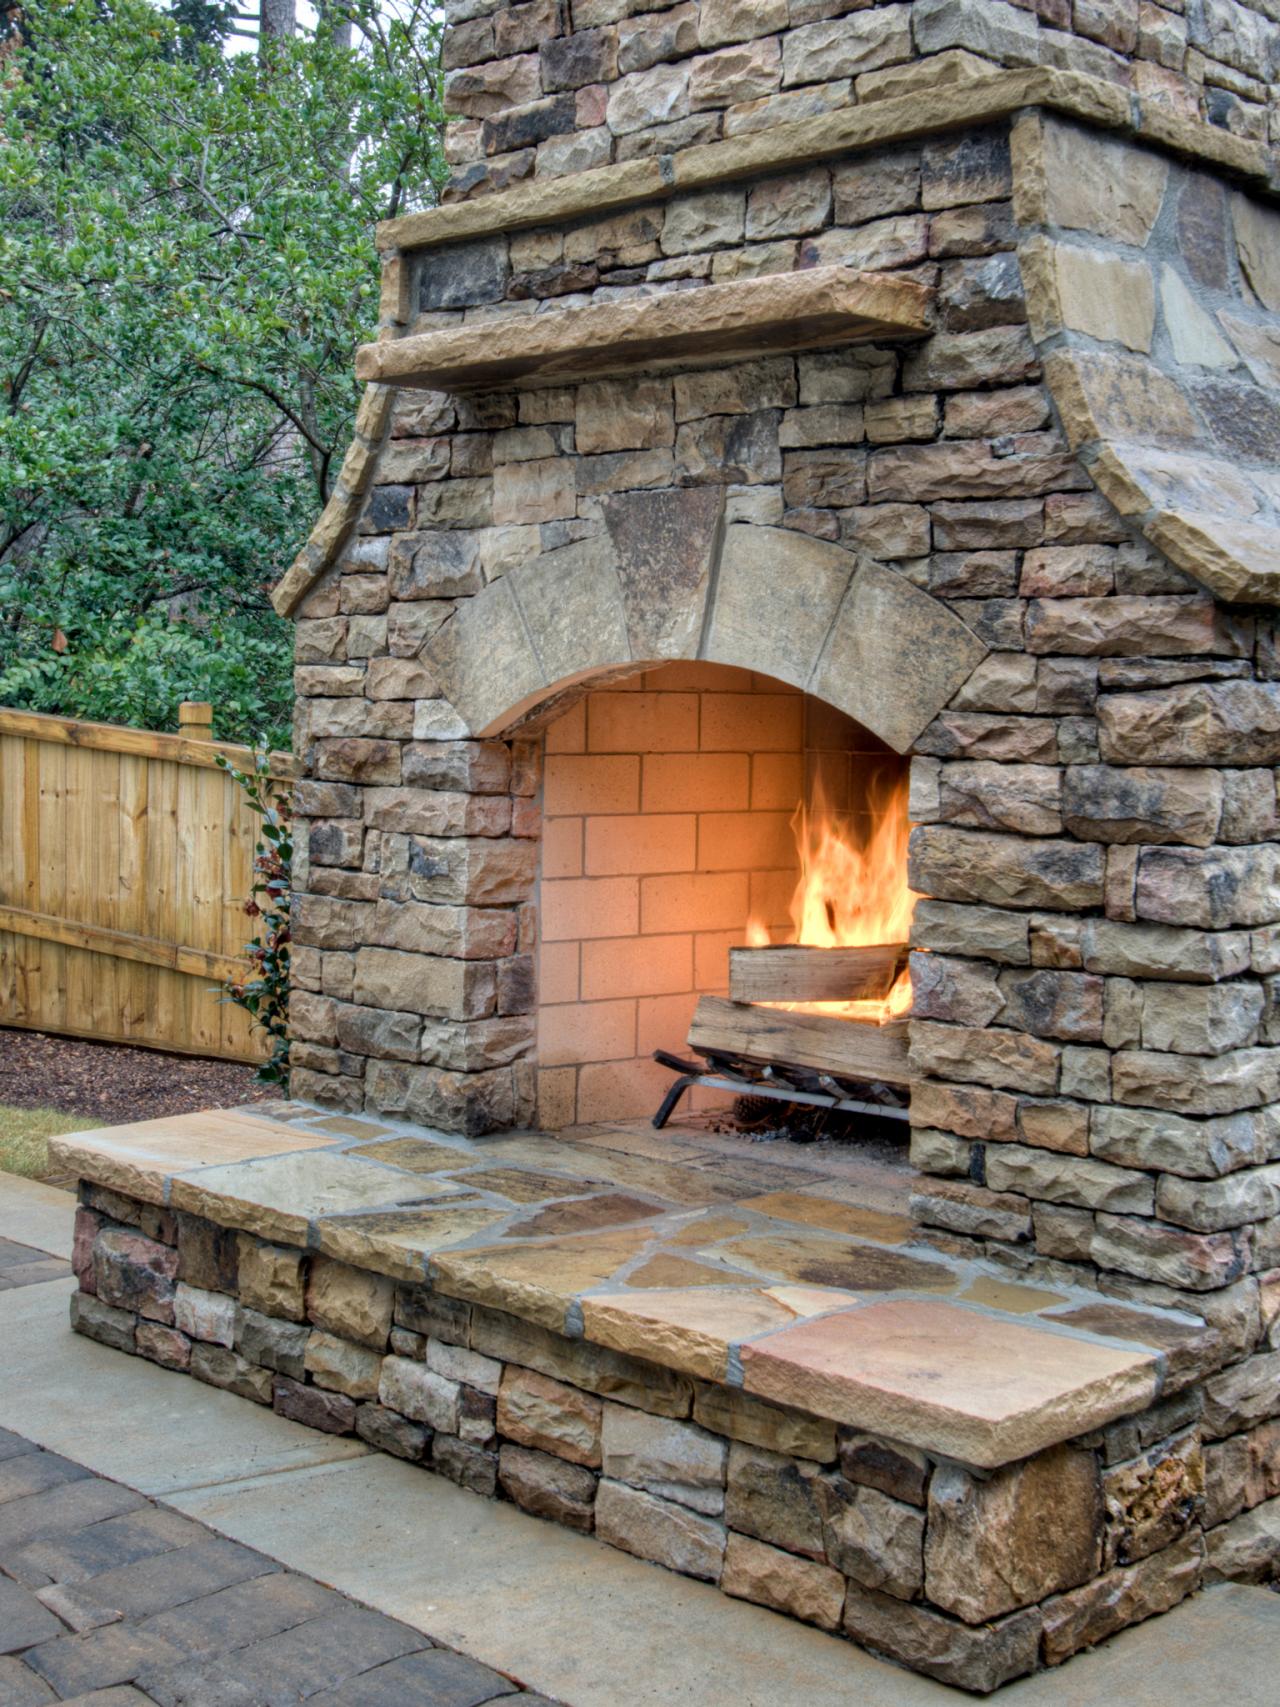 How To Build An Outdoor Fireplace, Do You Need A Permit For Gas Fire Pit